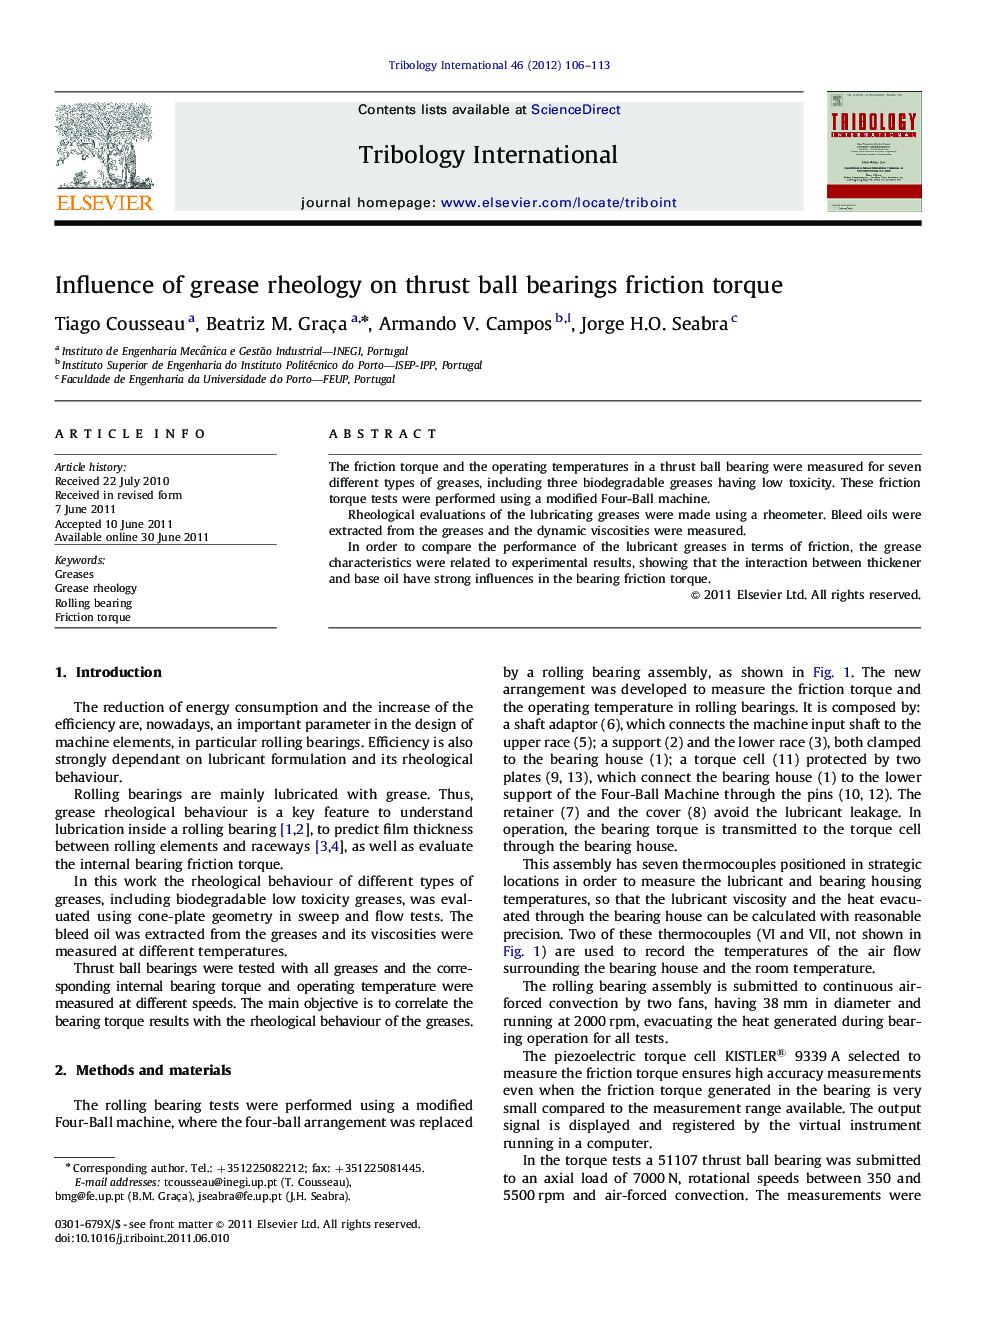 Influence of grease rheology on thrust ball bearings friction torque